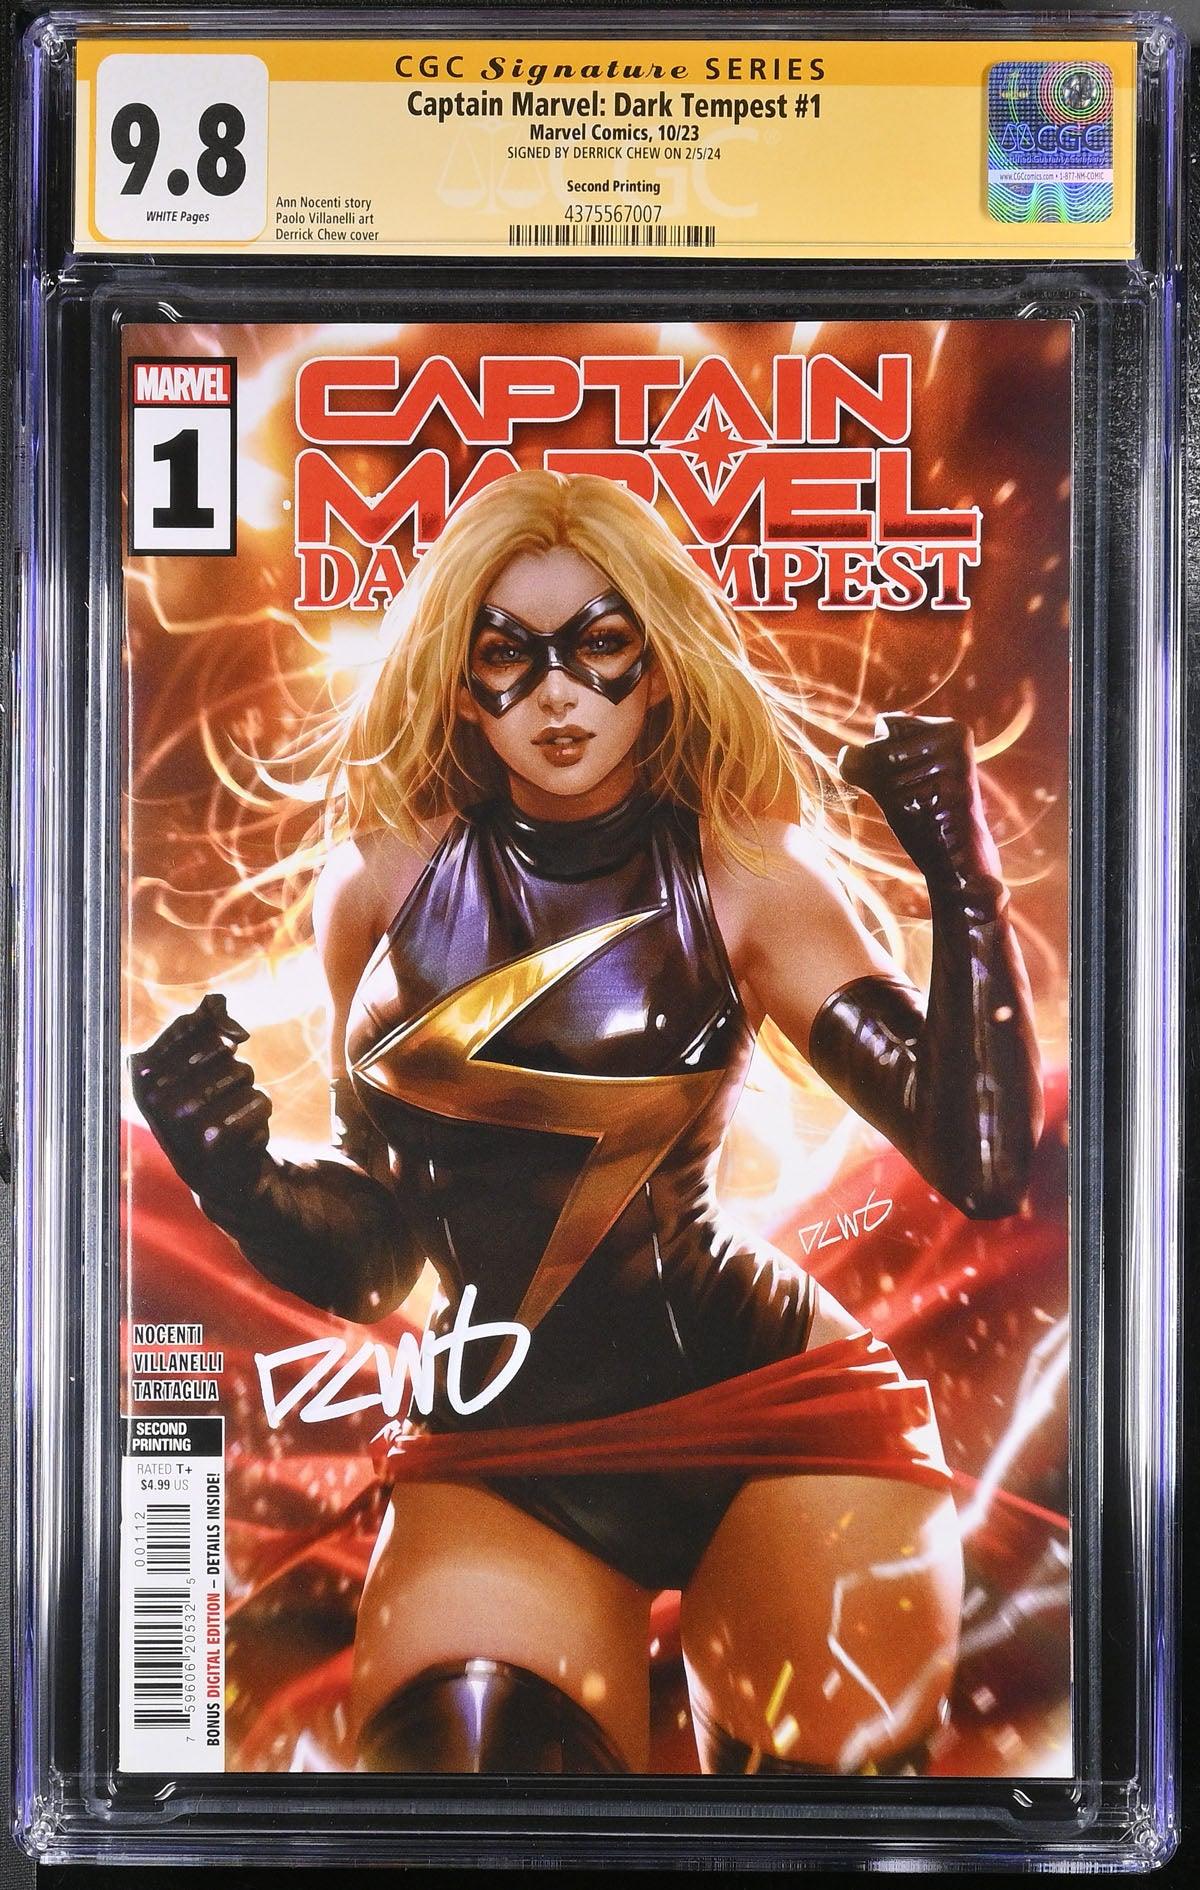 CGC CAPTAIN MARVEL DARK TEMPEST #1 2ND PRINT (9.8) SIGNATURE SERIES - SIGNED BY DERRICK CHEW - Kings Comics